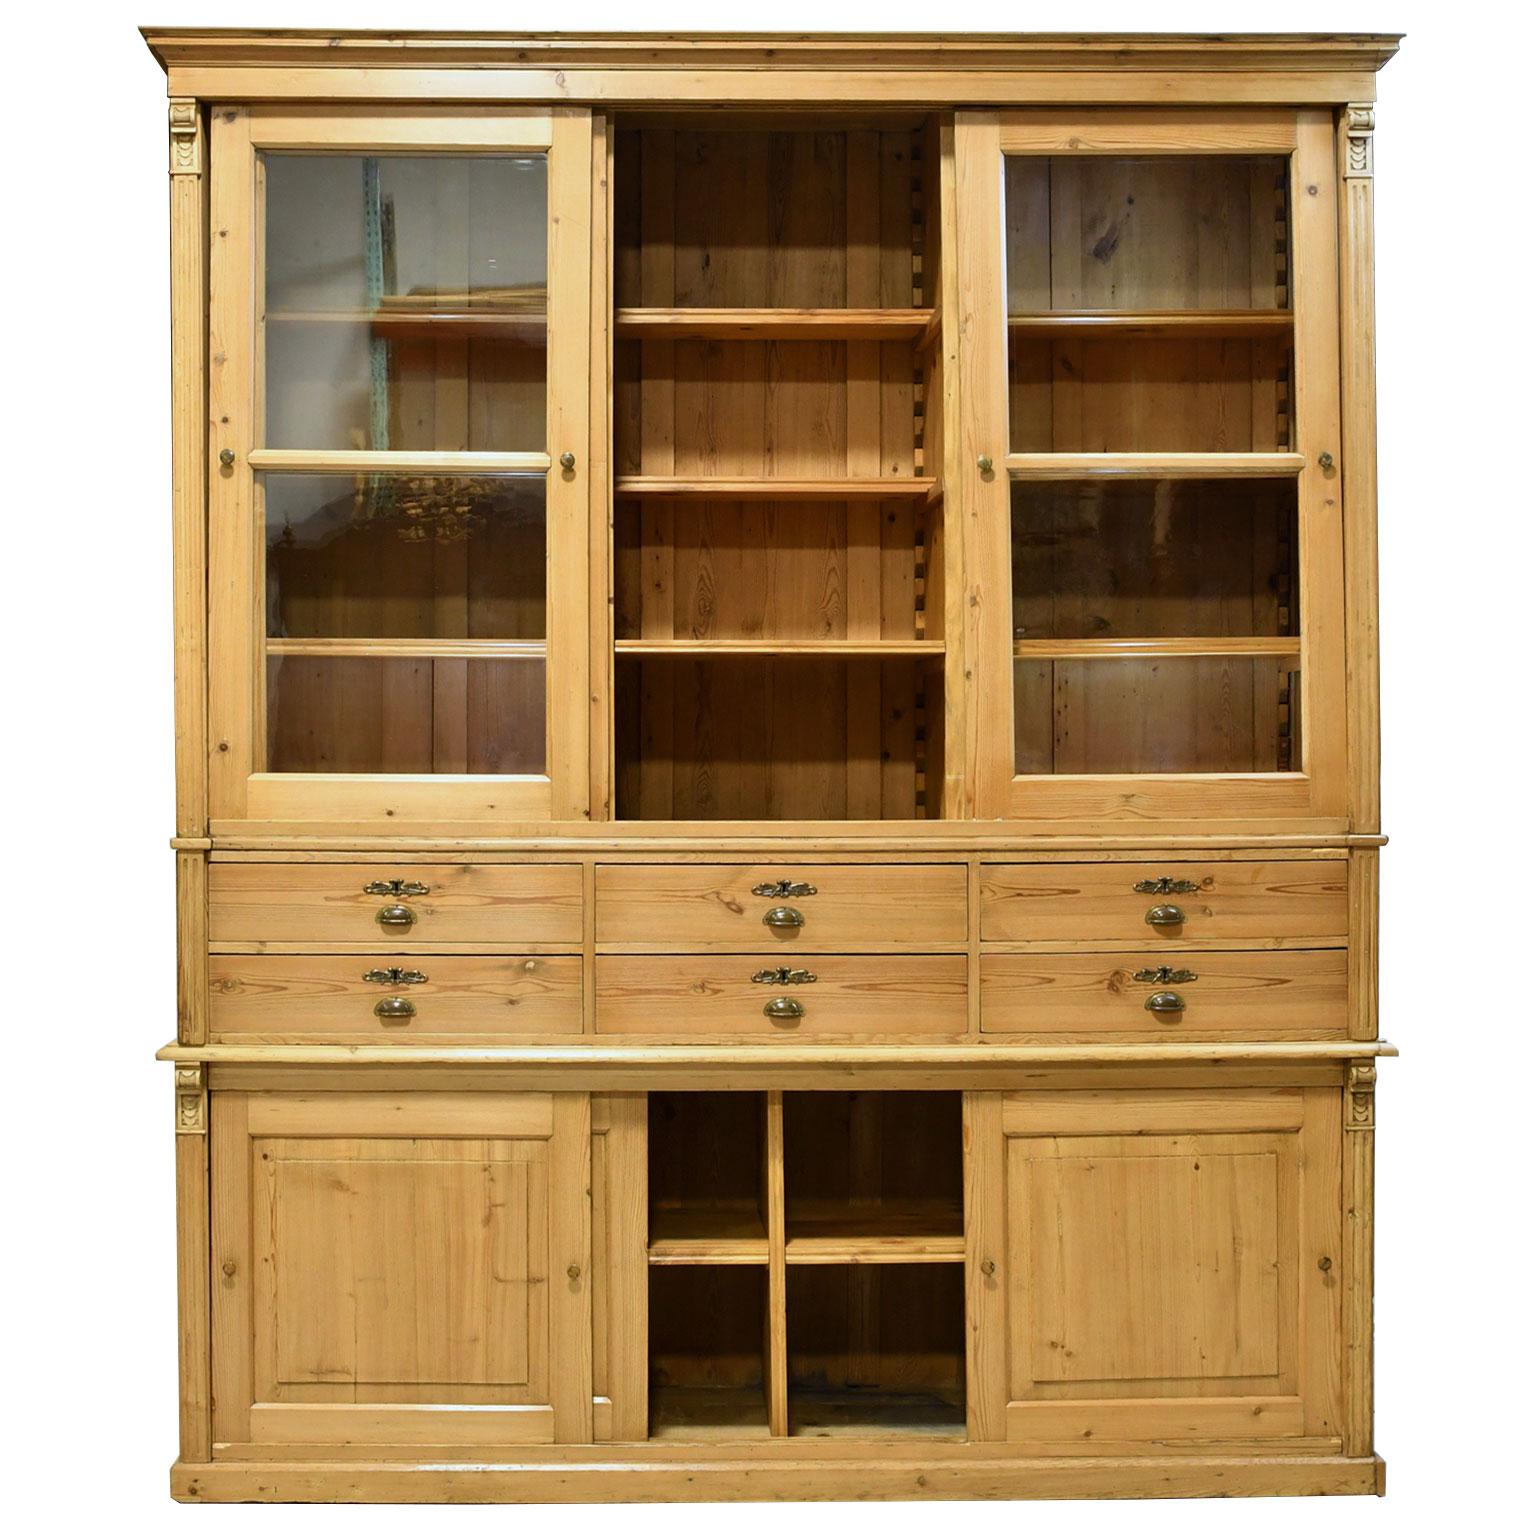 An exceptional cabinet in light-colored pine, that likely was made for a store or boutique, given its large size and configuration. It offers lots of storage comprising of three sliding-glass doors for display above two rows of drawers (that total